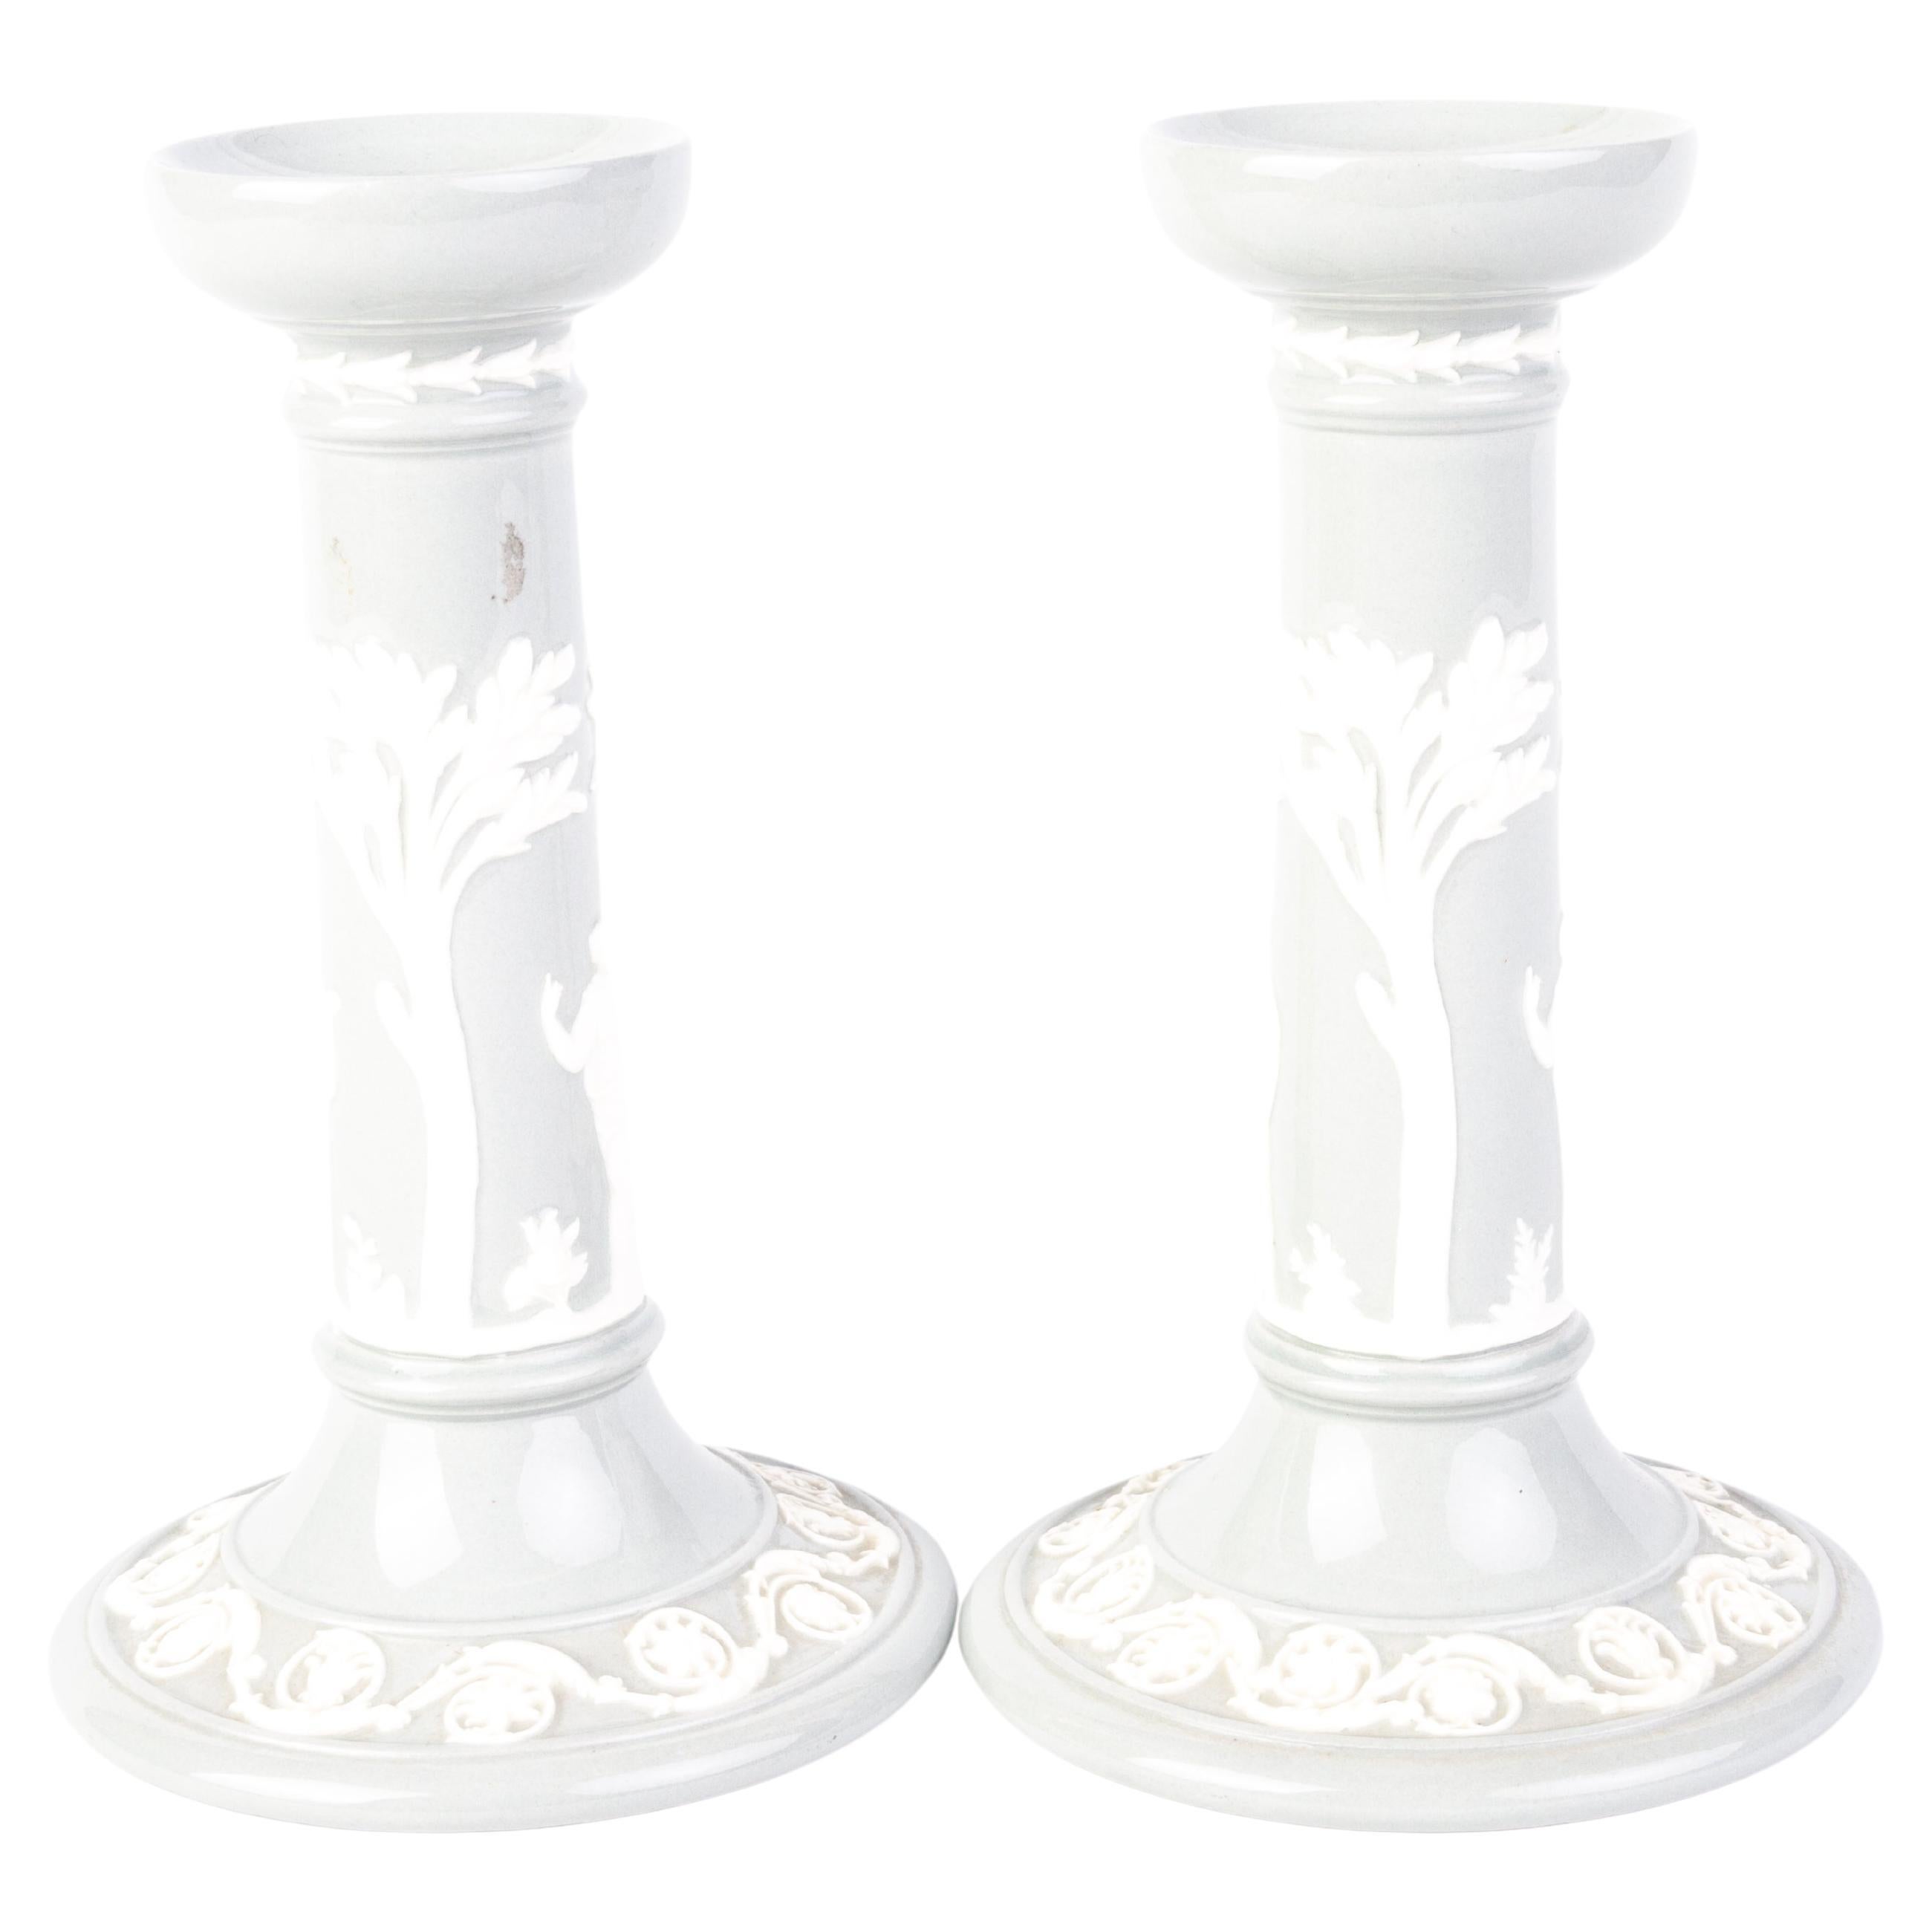 Pair of Wedgwood Queens Ware Neoclassical Cameo Candlesticks 